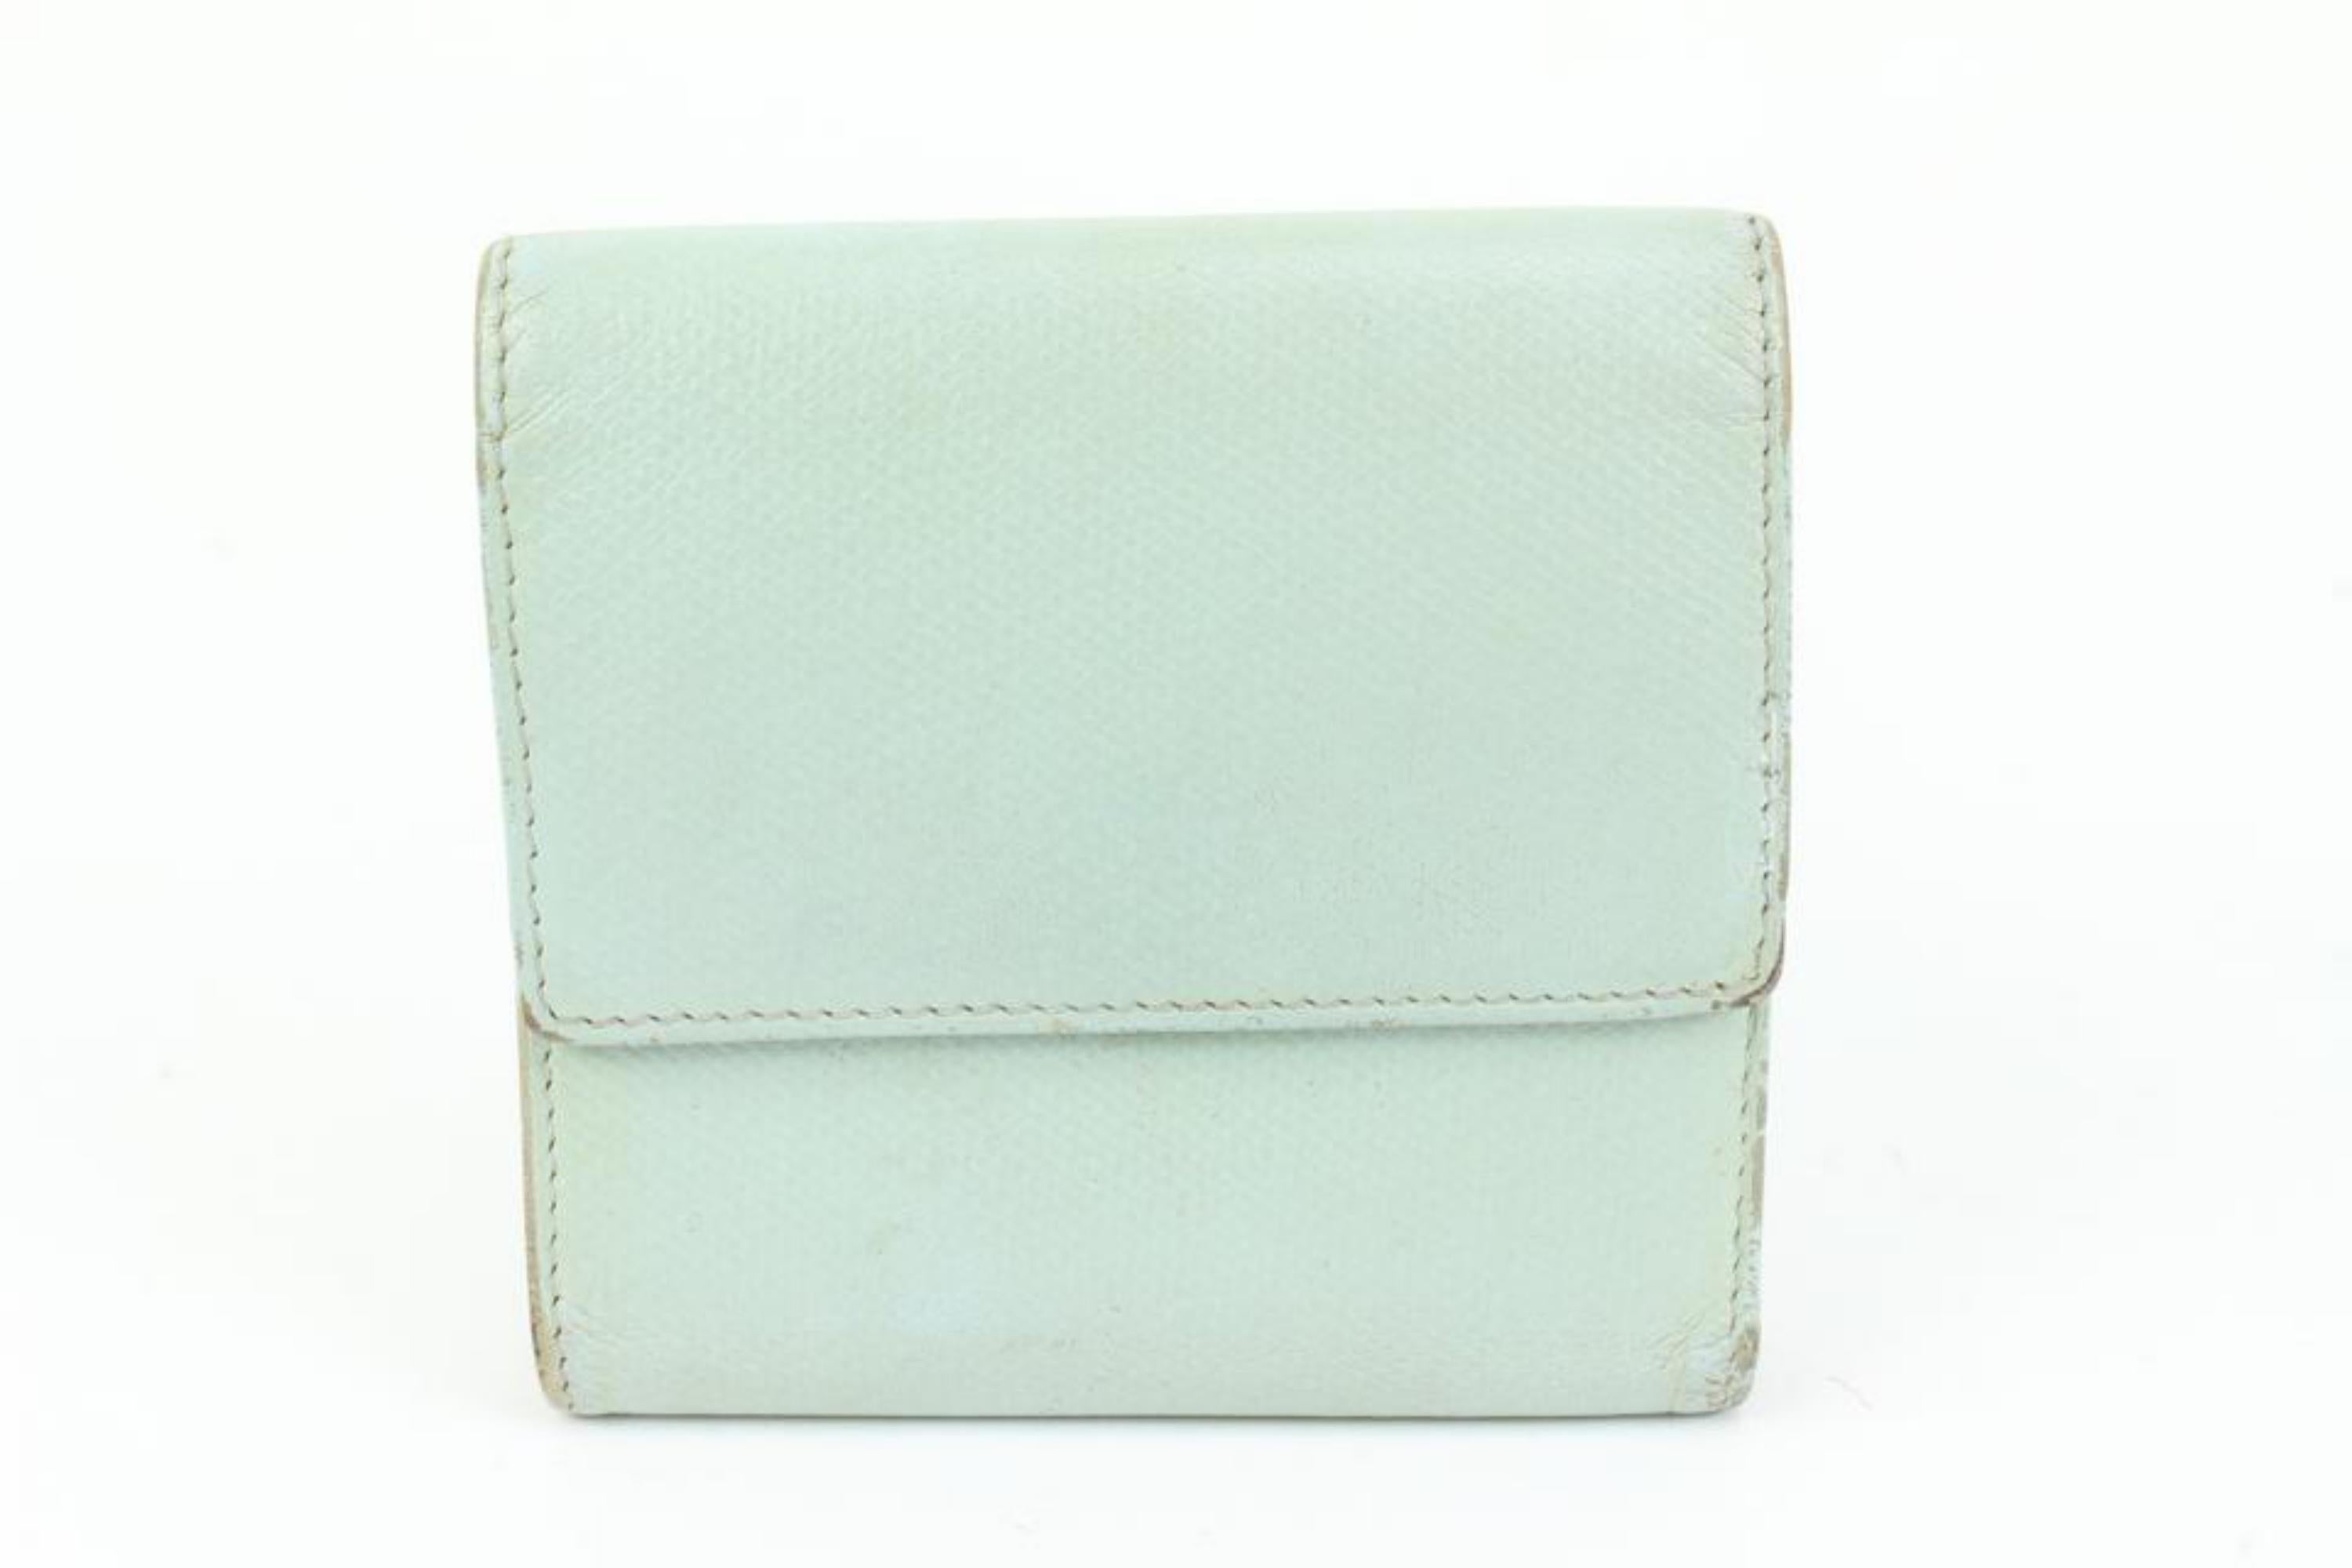 Gray Chanel Seafoam Green Calfskin Button Line Compact Trifold Wallet 54ck325s For Sale